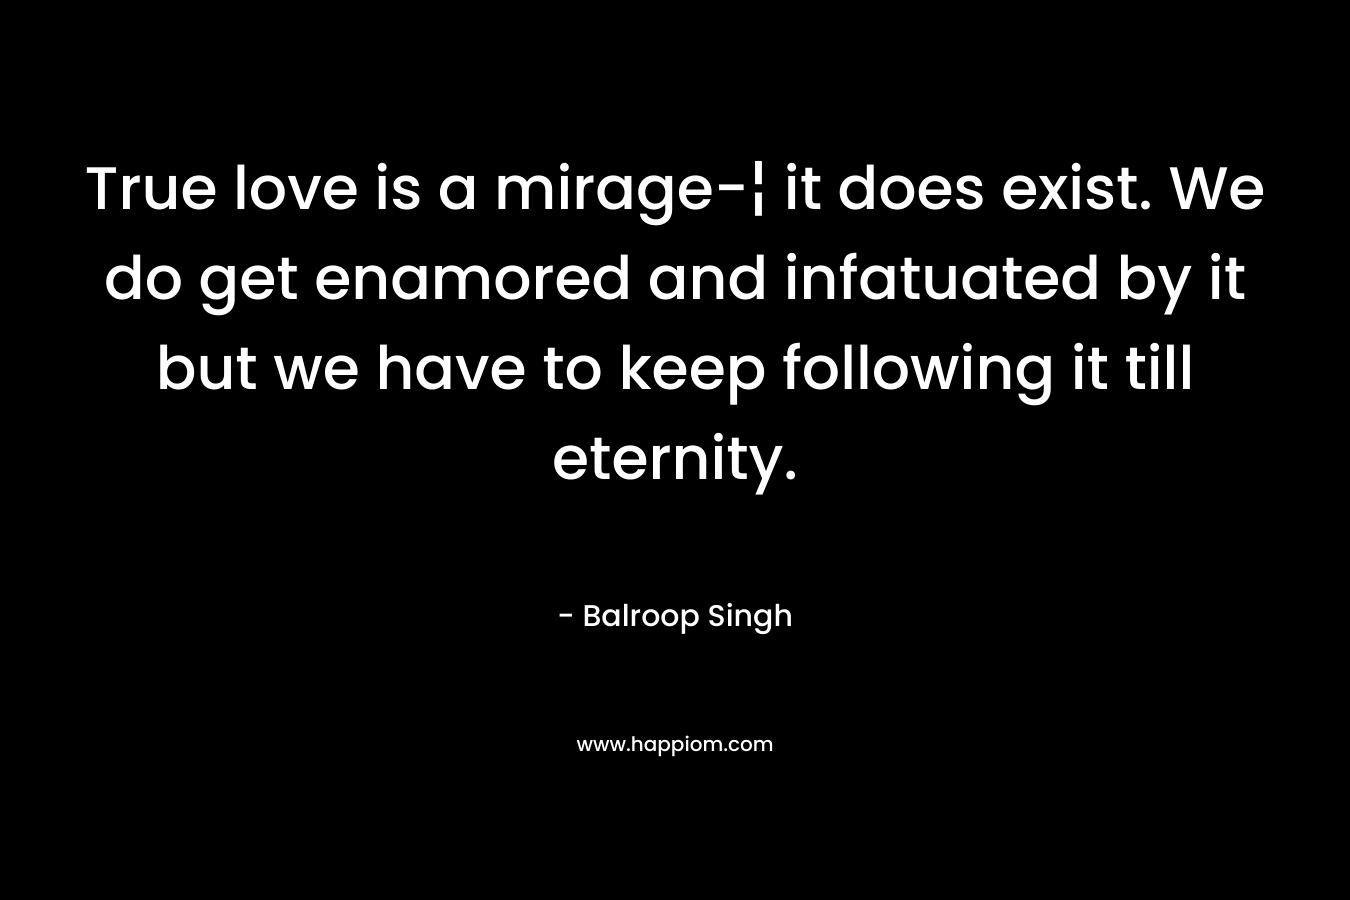 True love is a mirage-¦ it does exist. We do get enamored and infatuated by it but we have to keep following it till eternity. – Balroop Singh